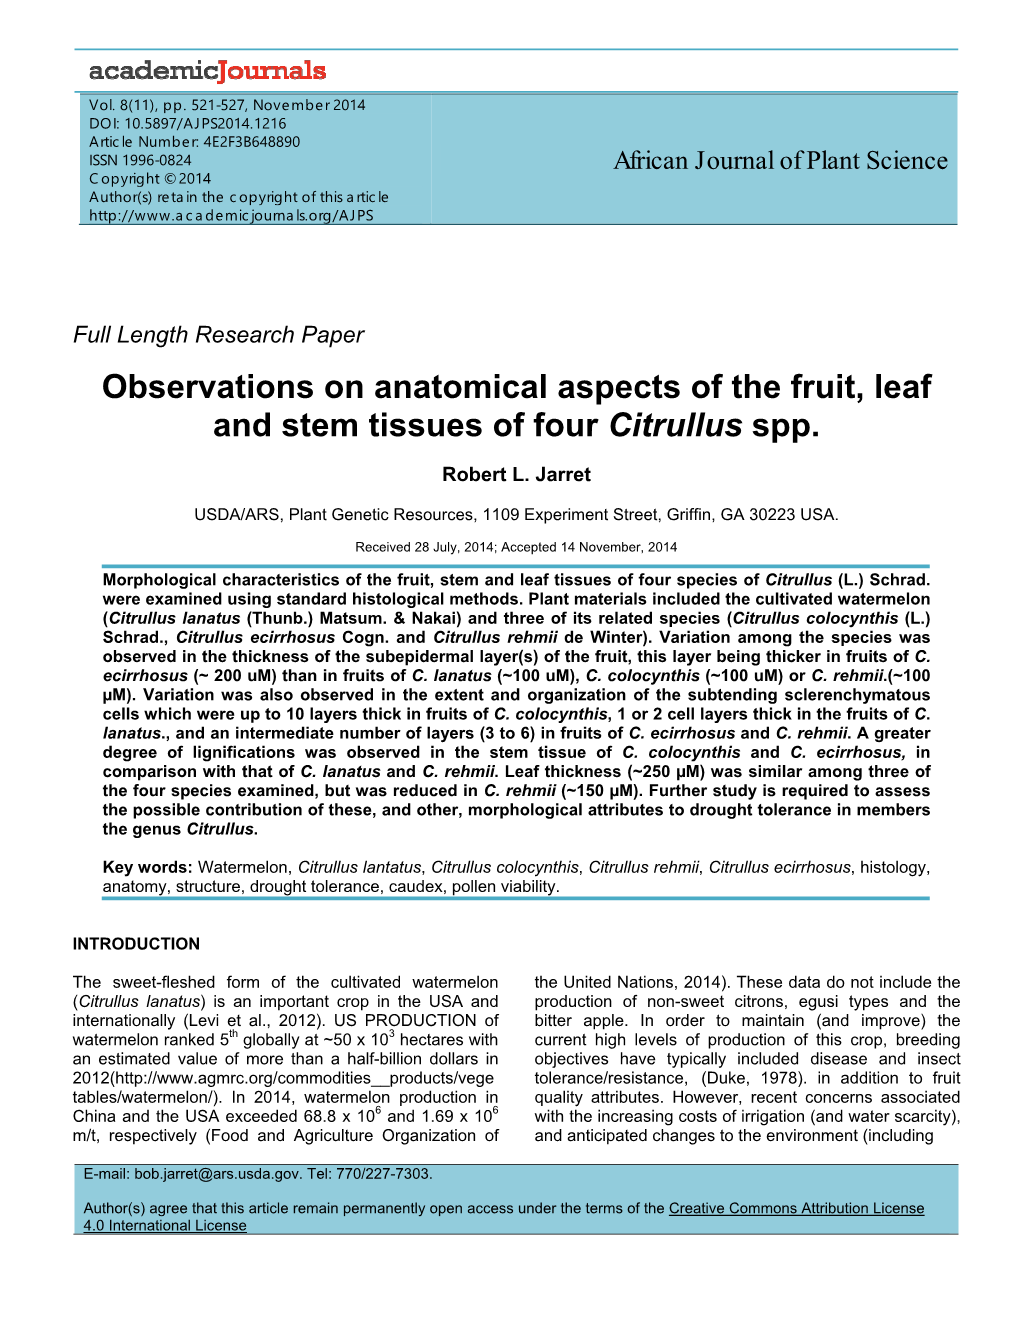 Observations on Anatomical Aspects of the Fruit, Leaf and Stem Tissues of Four Citrullus Spp